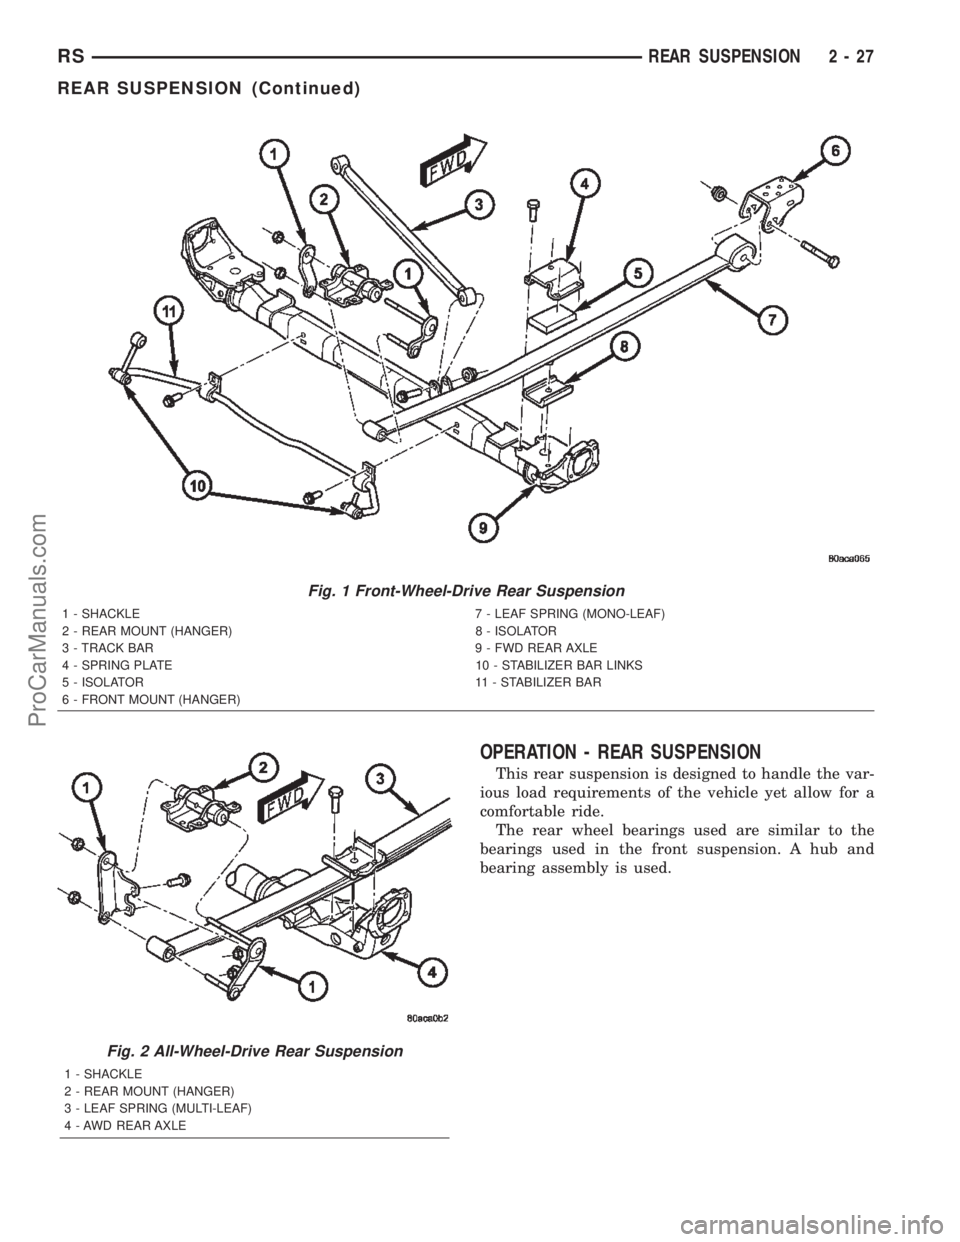 CHRYSLER TOWN AND COUNTRY 2002 Workshop Manual OPERATION - REAR SUSPENSION
This rear suspension is designed to handle the var-
ious load requirements of the vehicle yet allow for a
comfortable ride.
The rear wheel bearings used are similar to the
